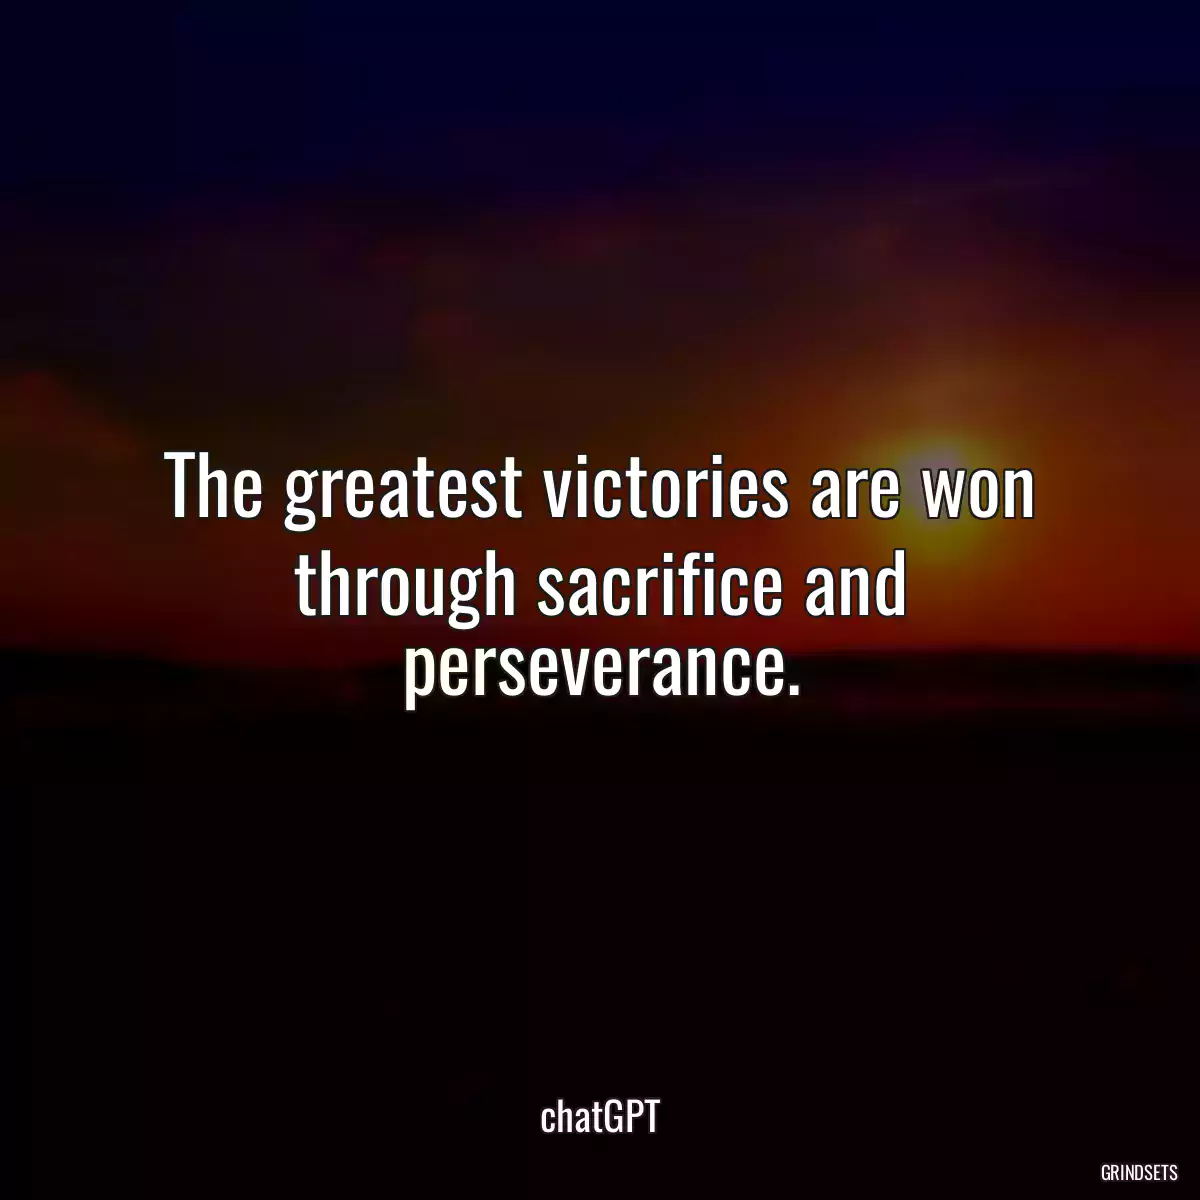 The greatest victories are won through sacrifice and perseverance.